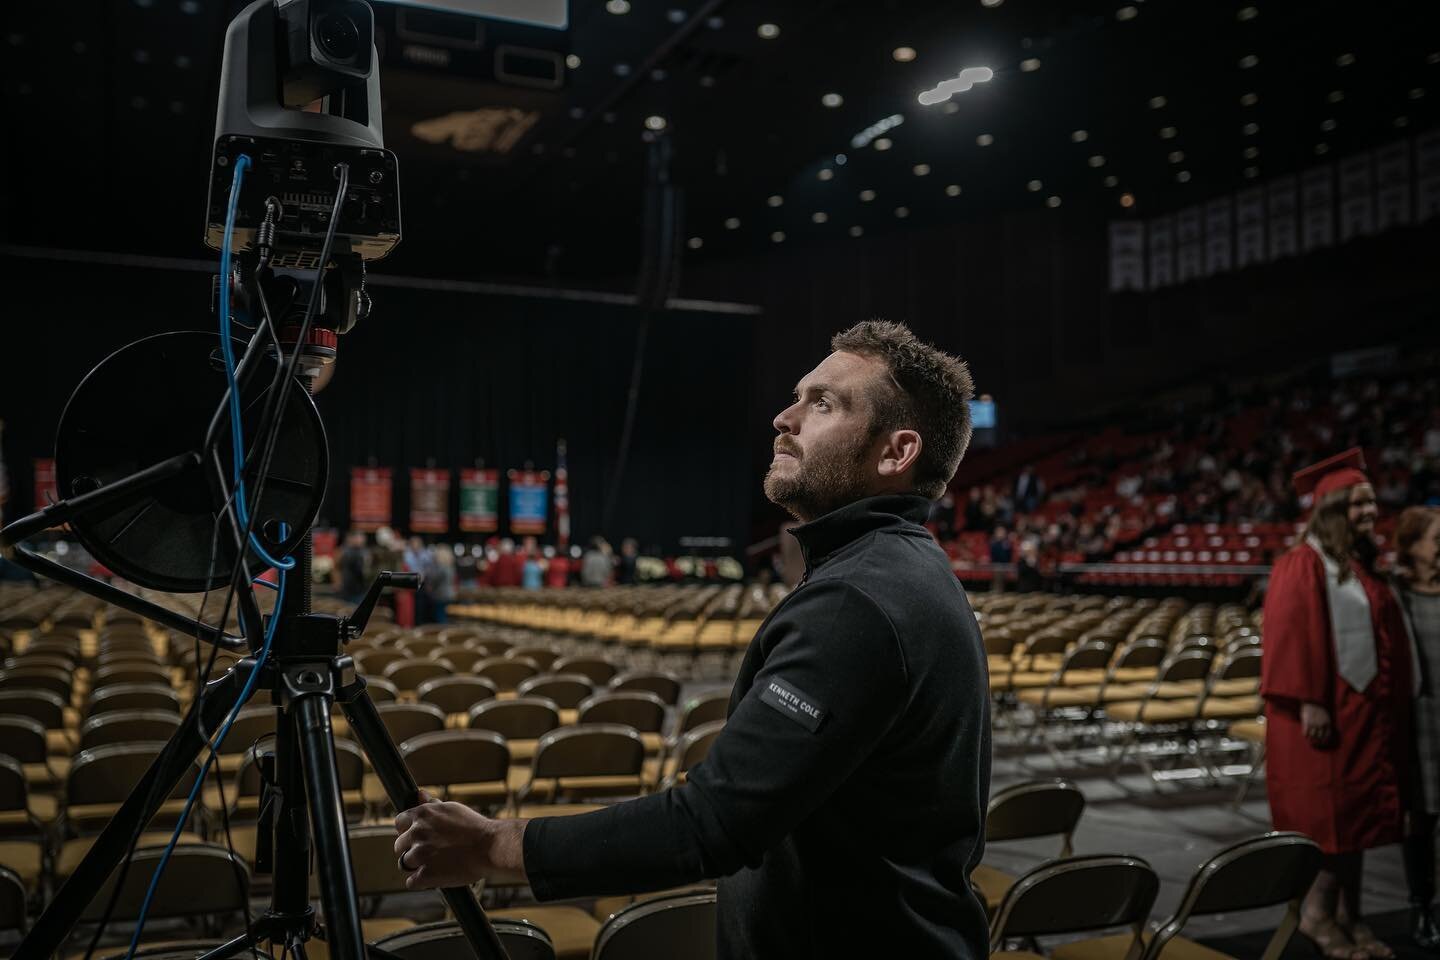 Did you know we offer livestream services? Here&rsquo;s some behind the scenes from our livestream of Miami University&rsquo;s Fall Commencement a few weeks ago!

📸: @avery.benter